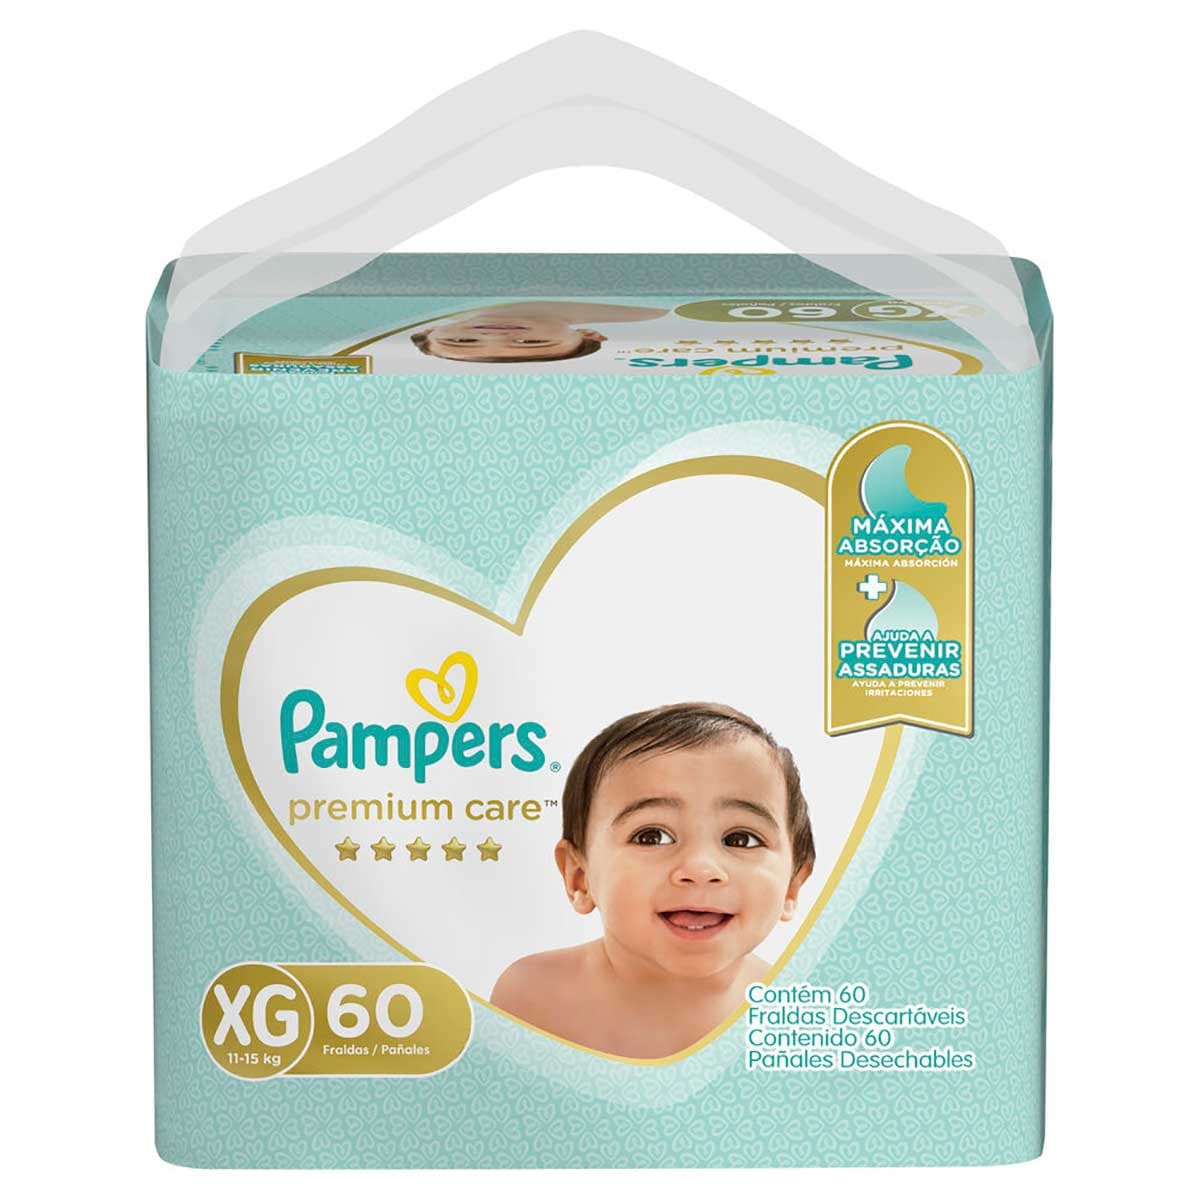 pampers pants tpay.com